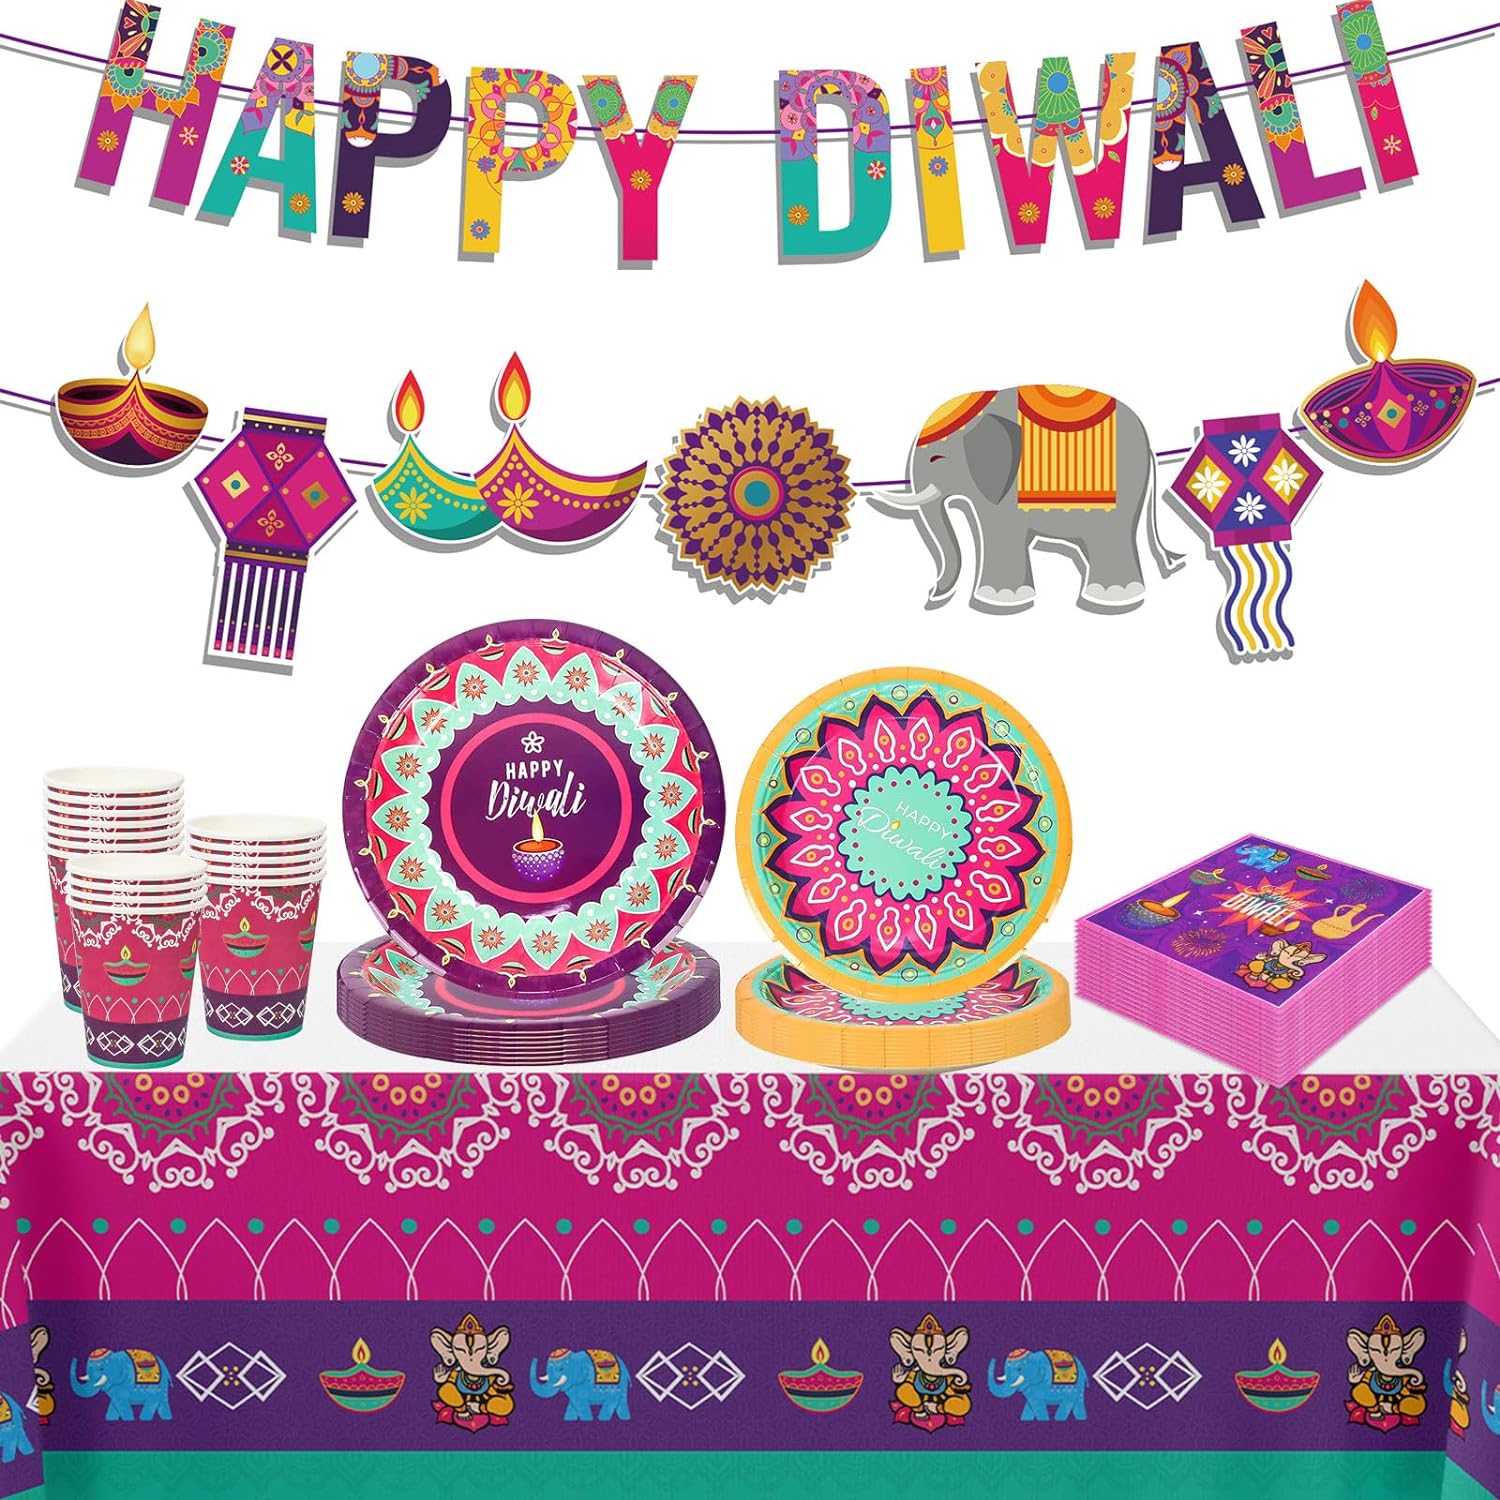 diwali-tableware-party-supplies-kit-for-16-people with colorful plates napkins and deocations